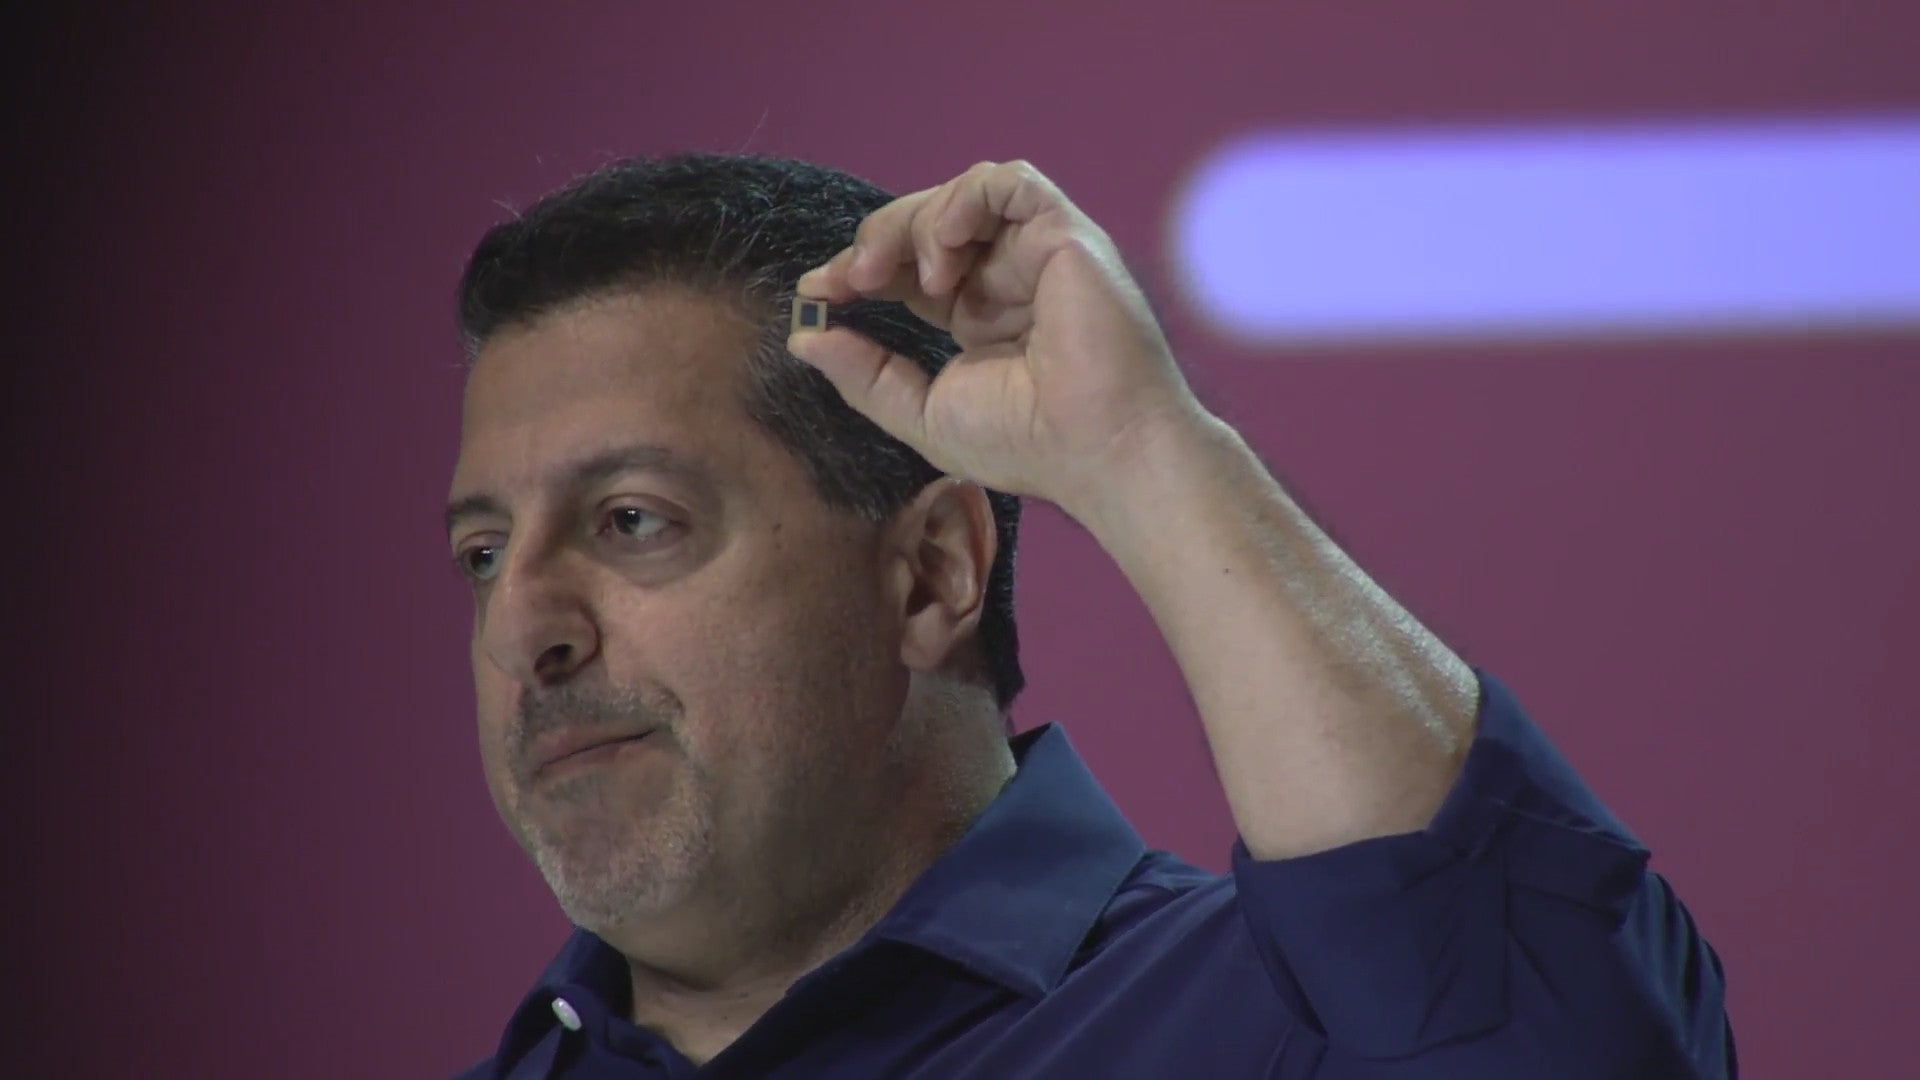 Alex Katouzian, Senior VP and GM of mobile for Qualcomm - Qualcomm's powerful Snapdragon 845 chipset goes official